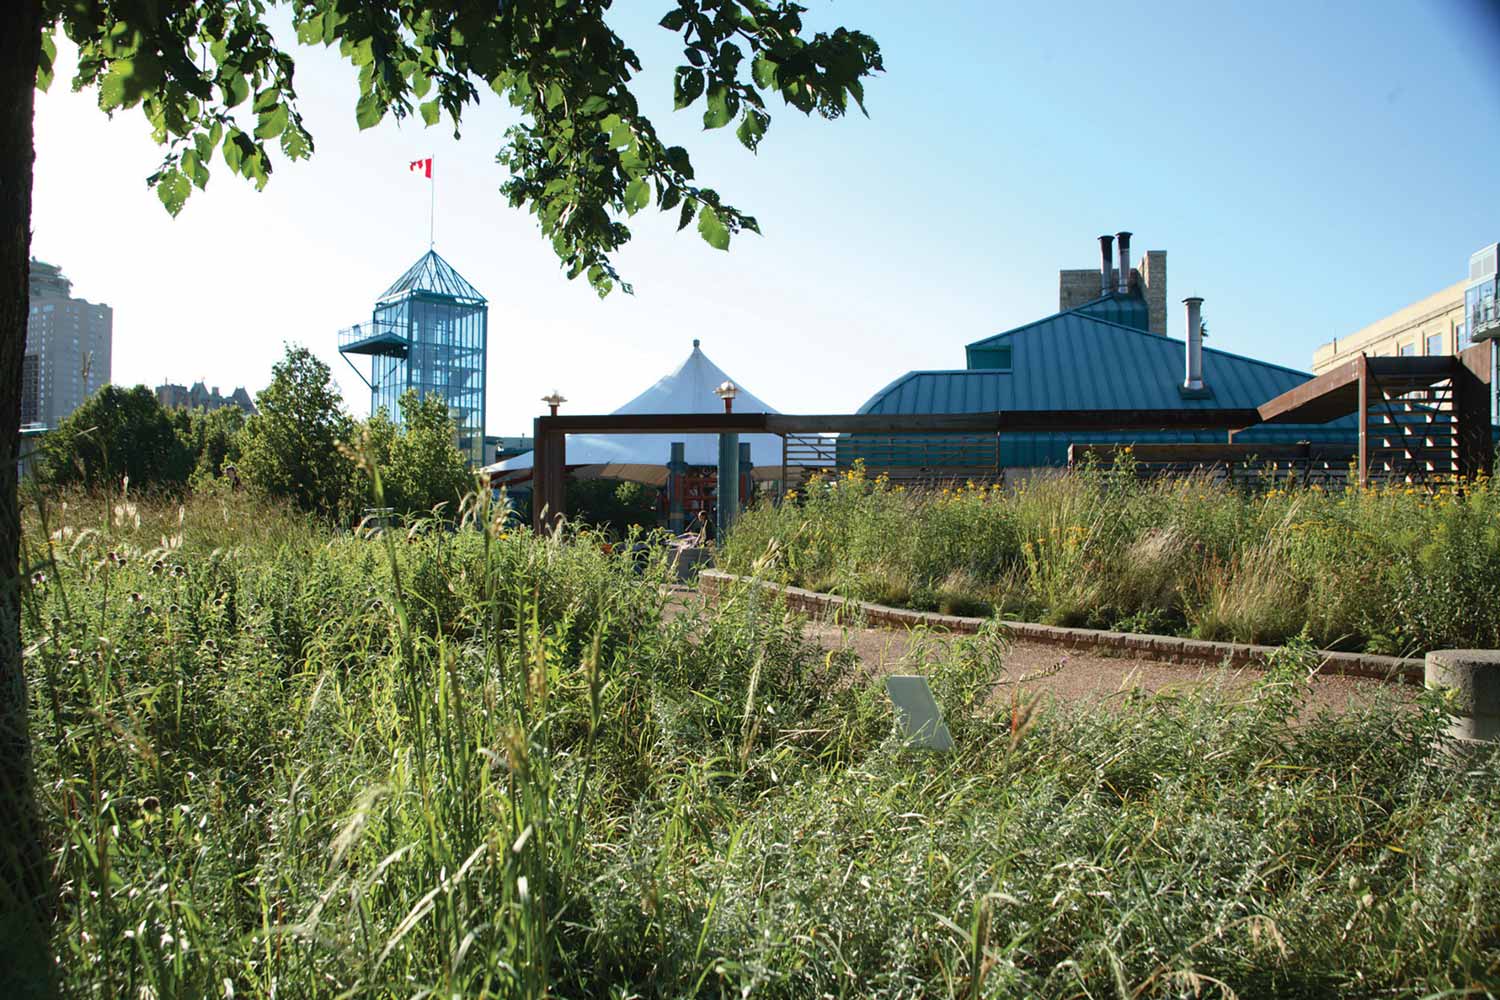 Tall prairie grasses next to a path. The Forks Market tower is in the background.